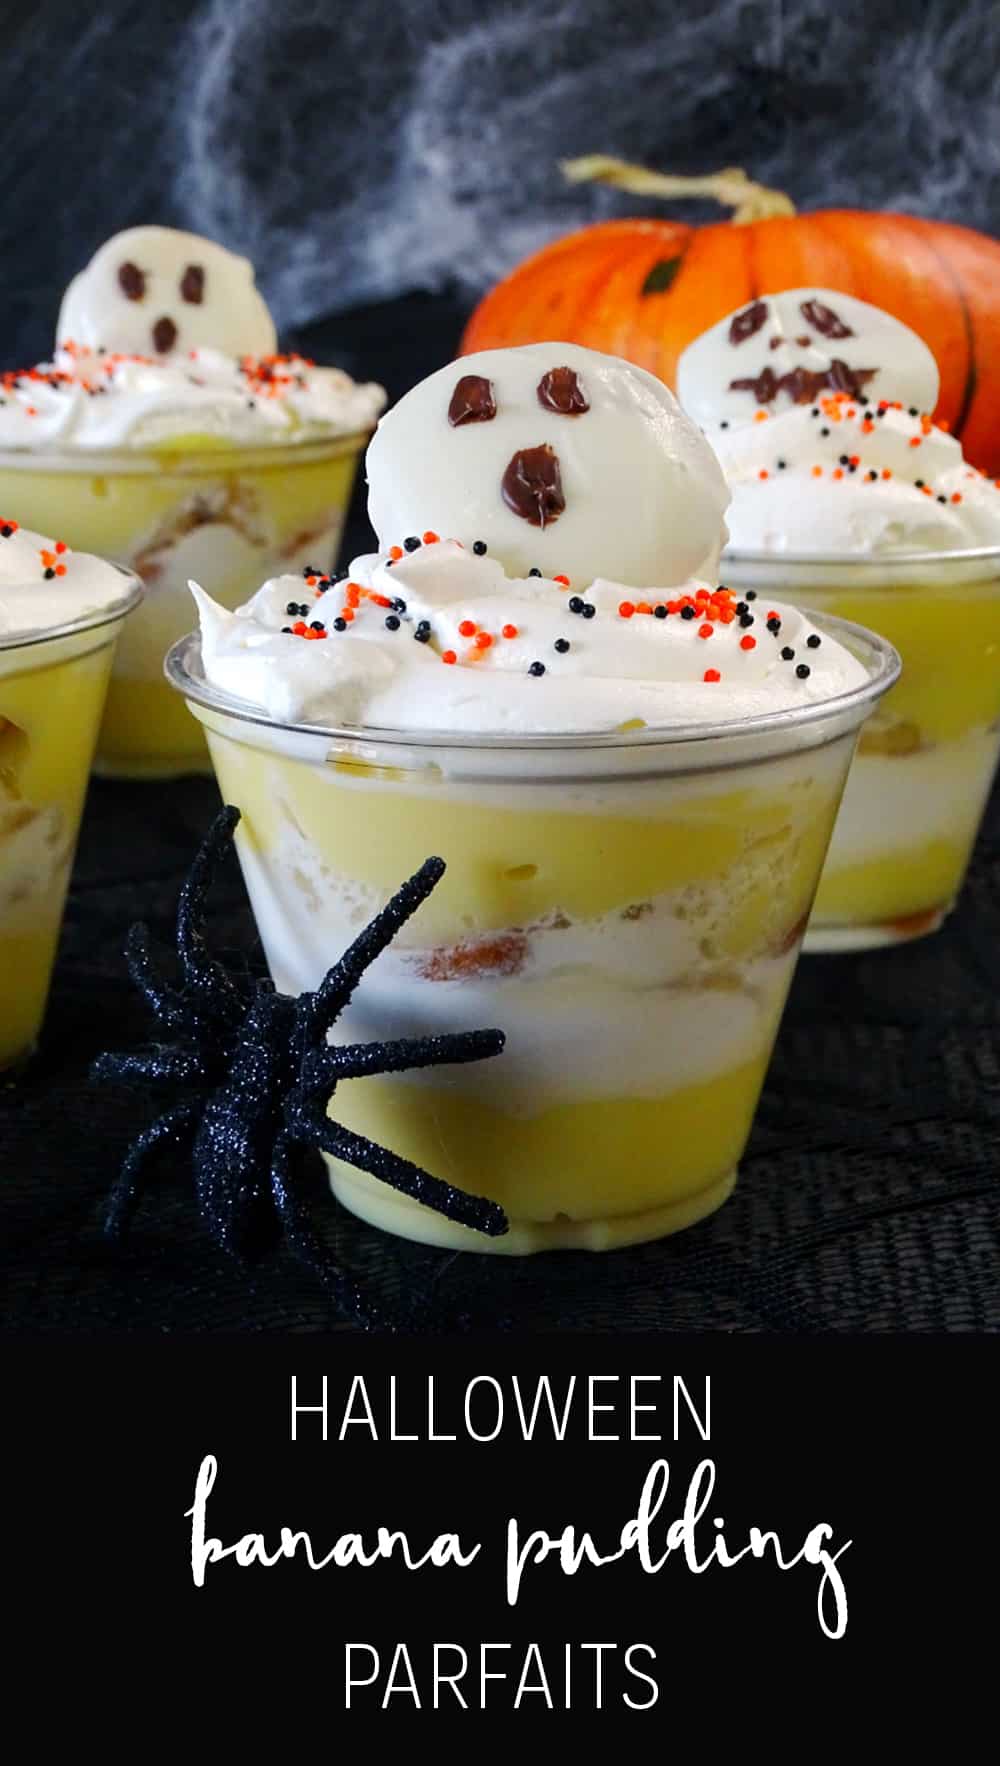 Need a fun dessert that's kid and adult approved? You've got to try these Halloween Banana Pudding Parfaits! So good and so simple!